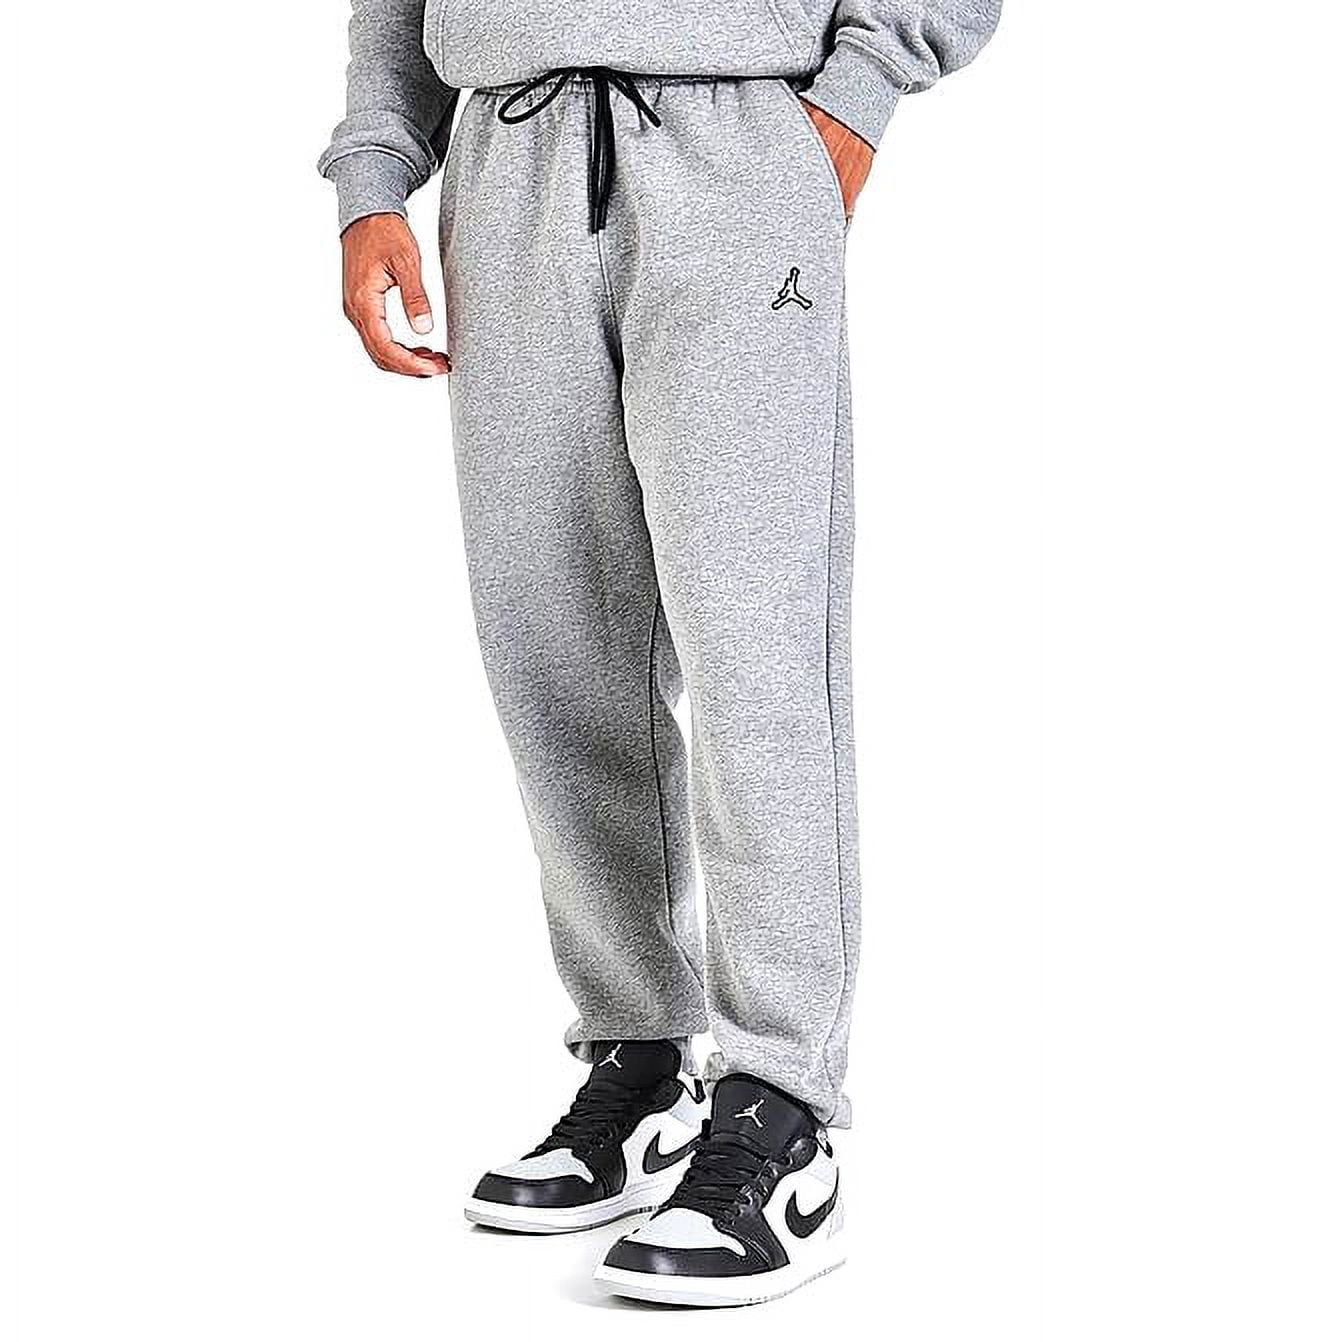  Jordan Men's Gym Red Essential Fleece Jogger (DQ7340 687) - S :  Clothing, Shoes & Jewelry